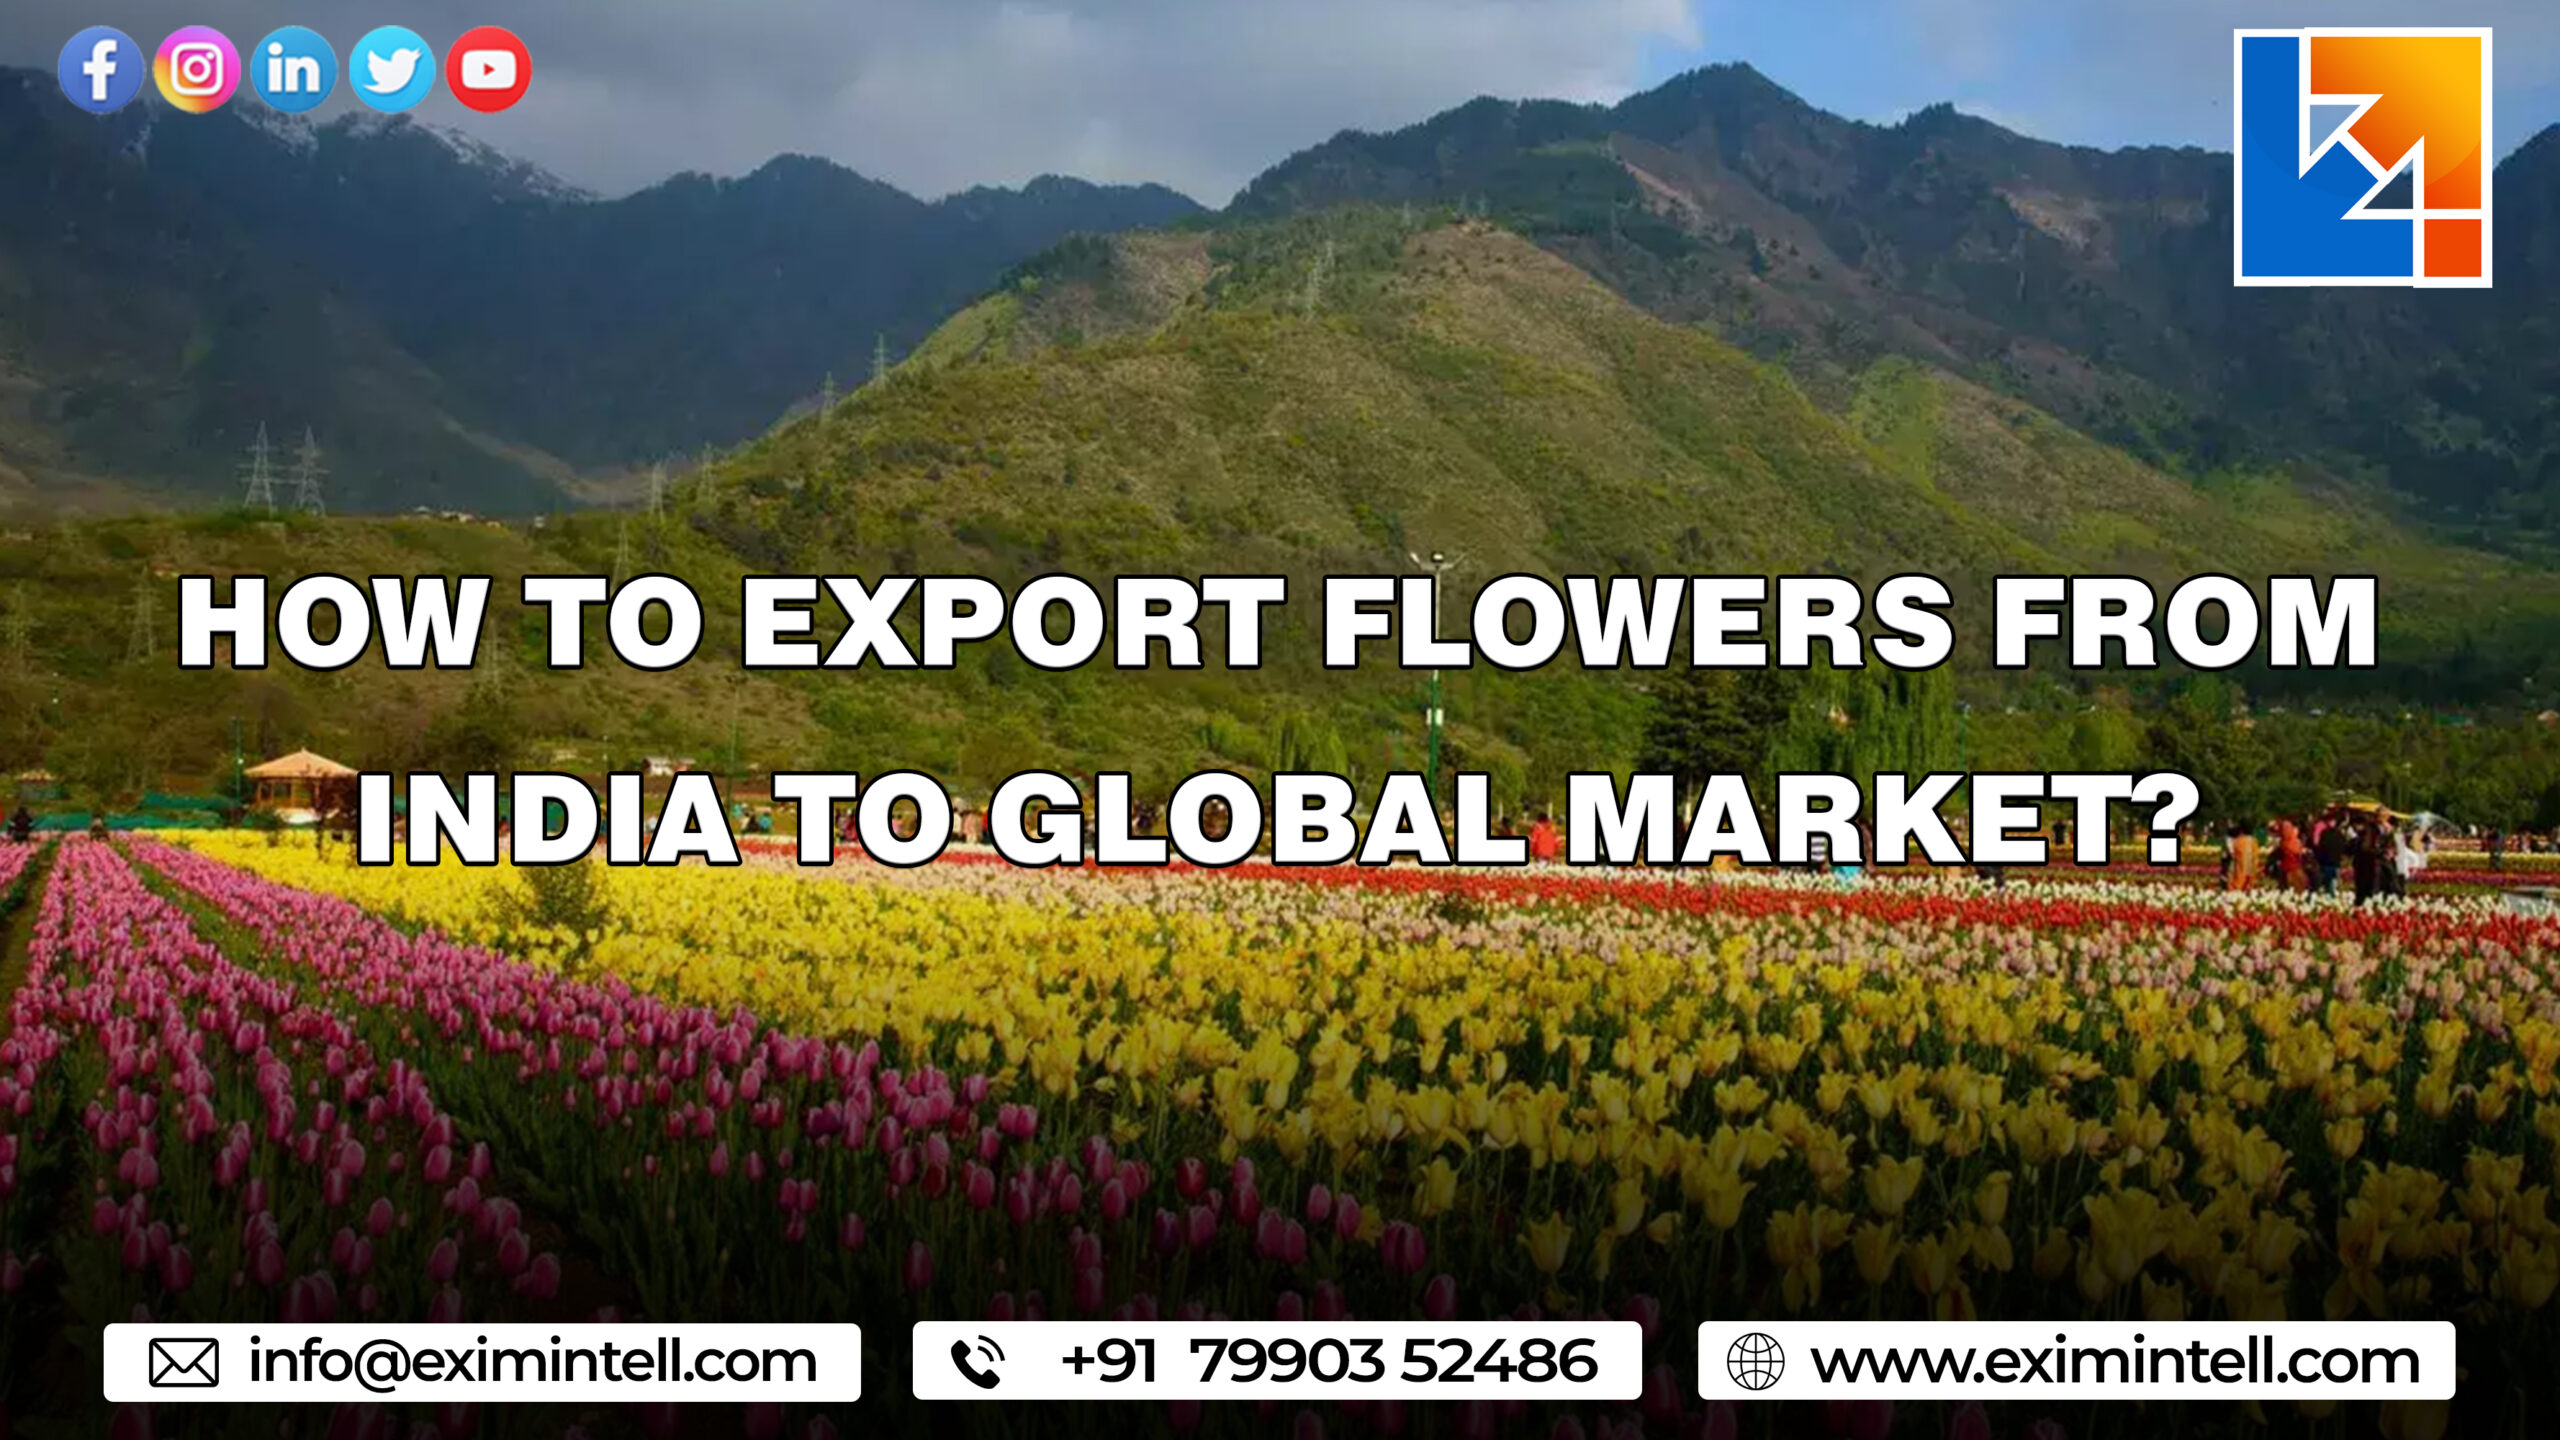 How to Export Flowers From India to Global Market?